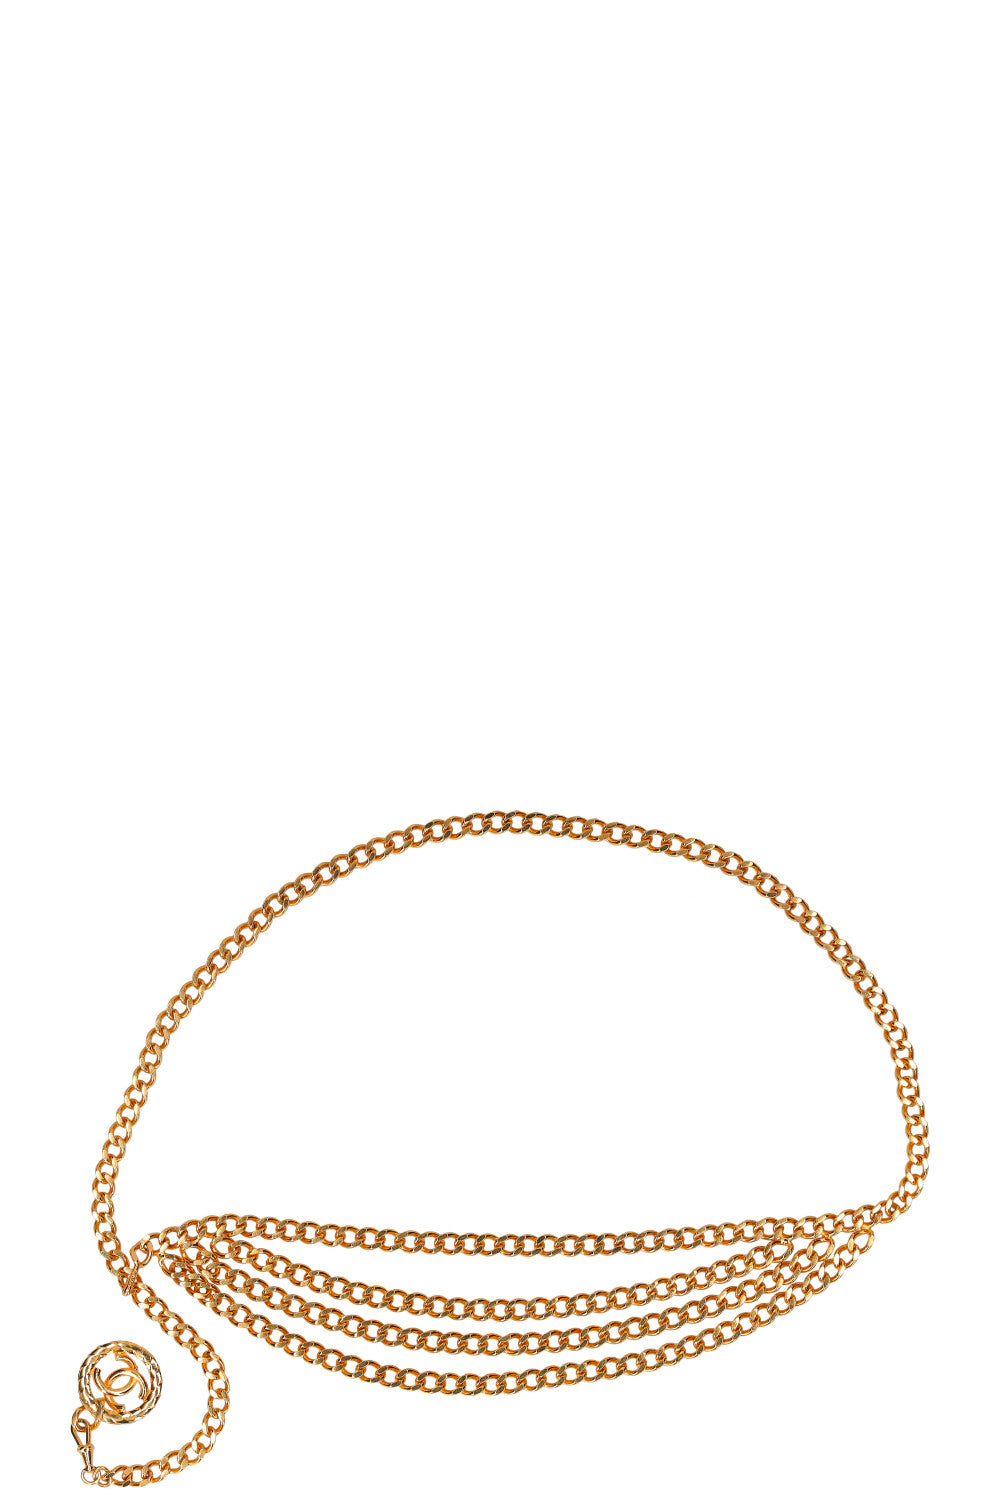 CHANEL Vintage Chain Belt with Pendant Gold